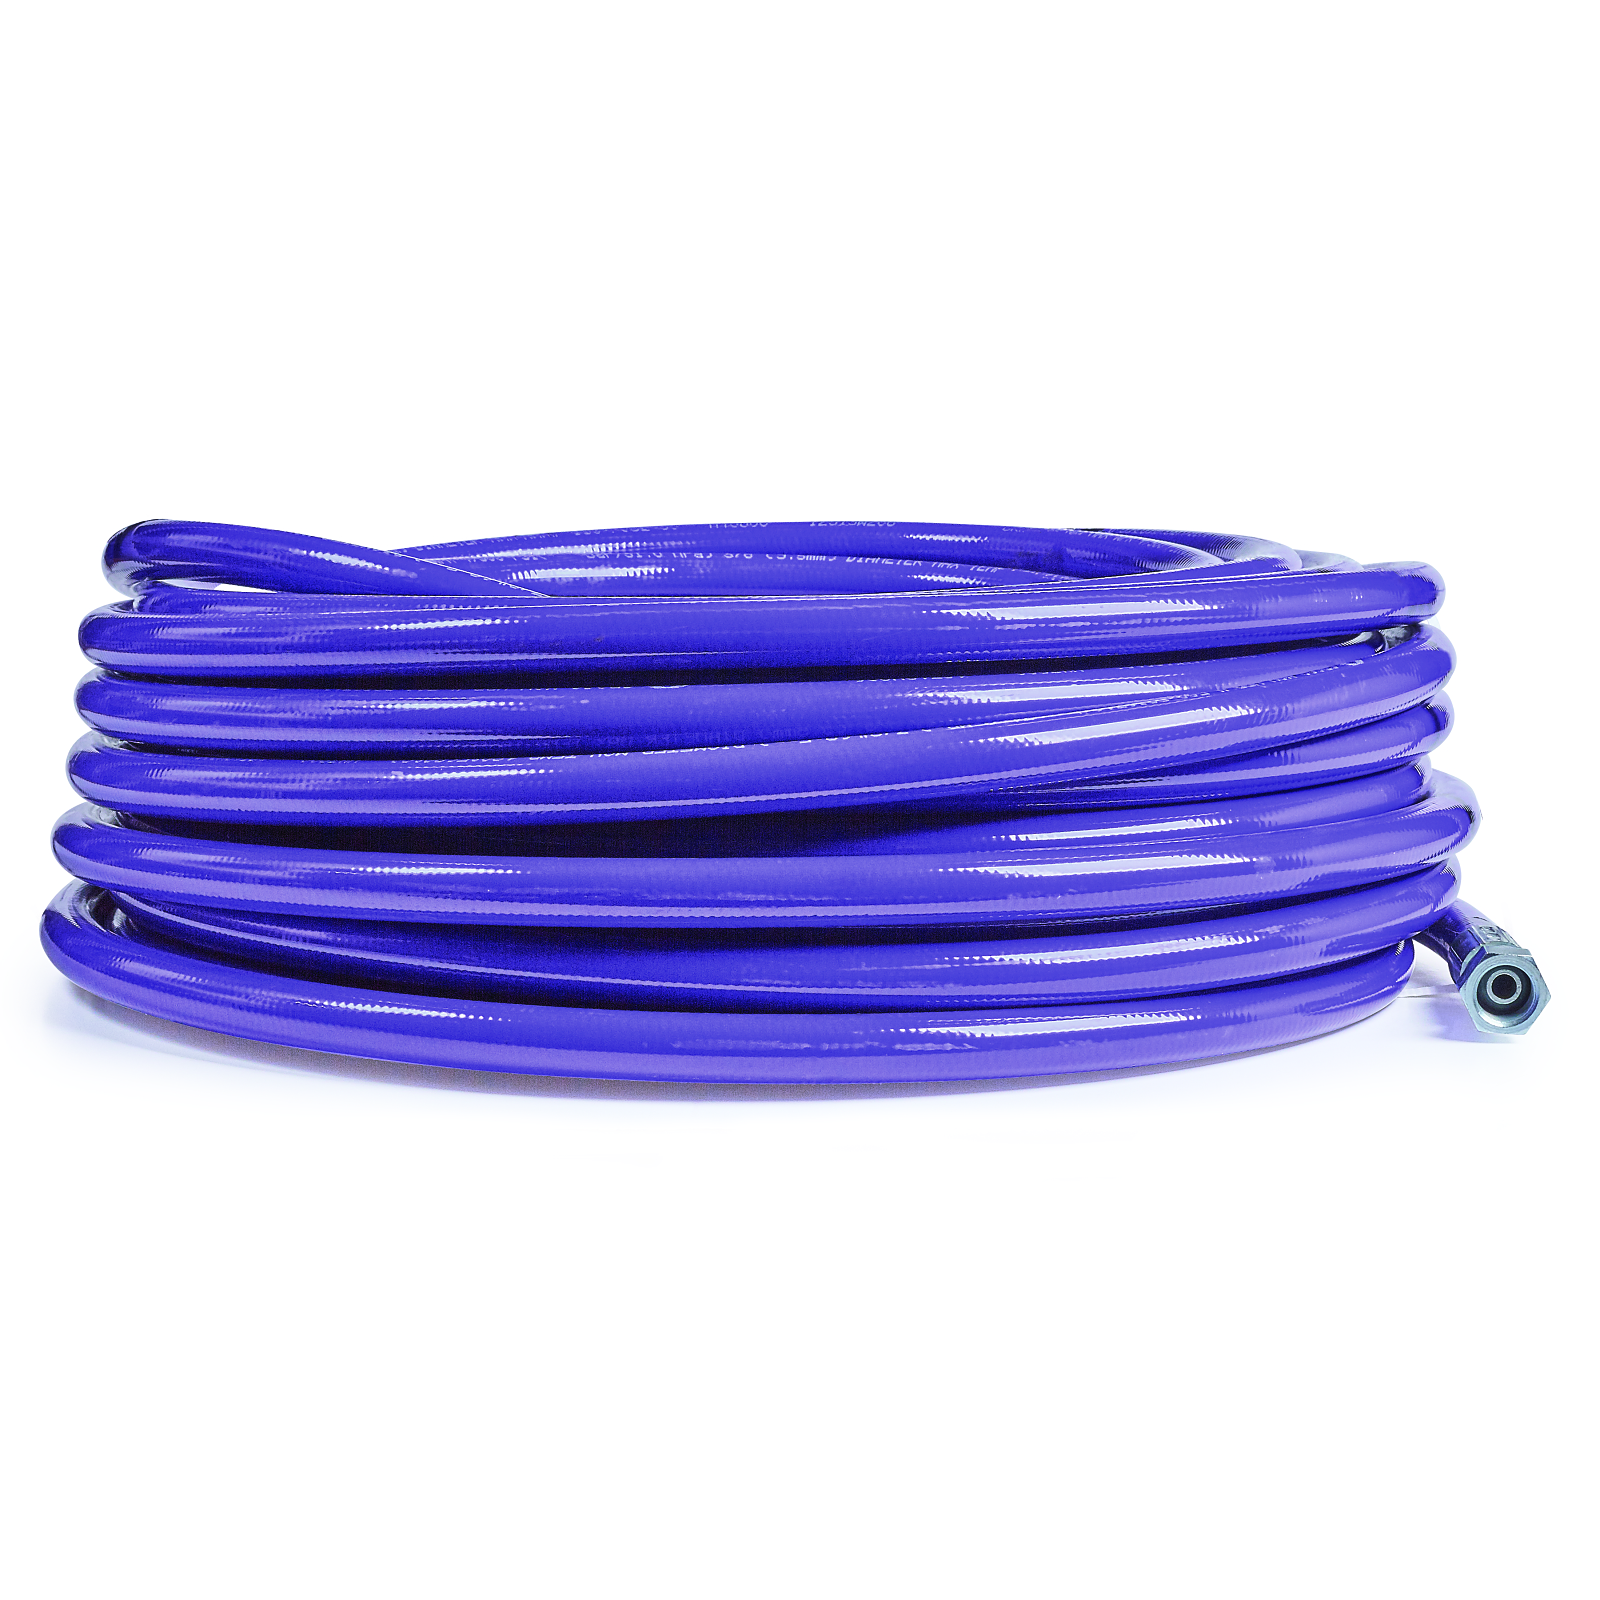 H4381X_Xtreme_Duty_Airless_Hose_3_8in_x_100ft_4500psi_Main